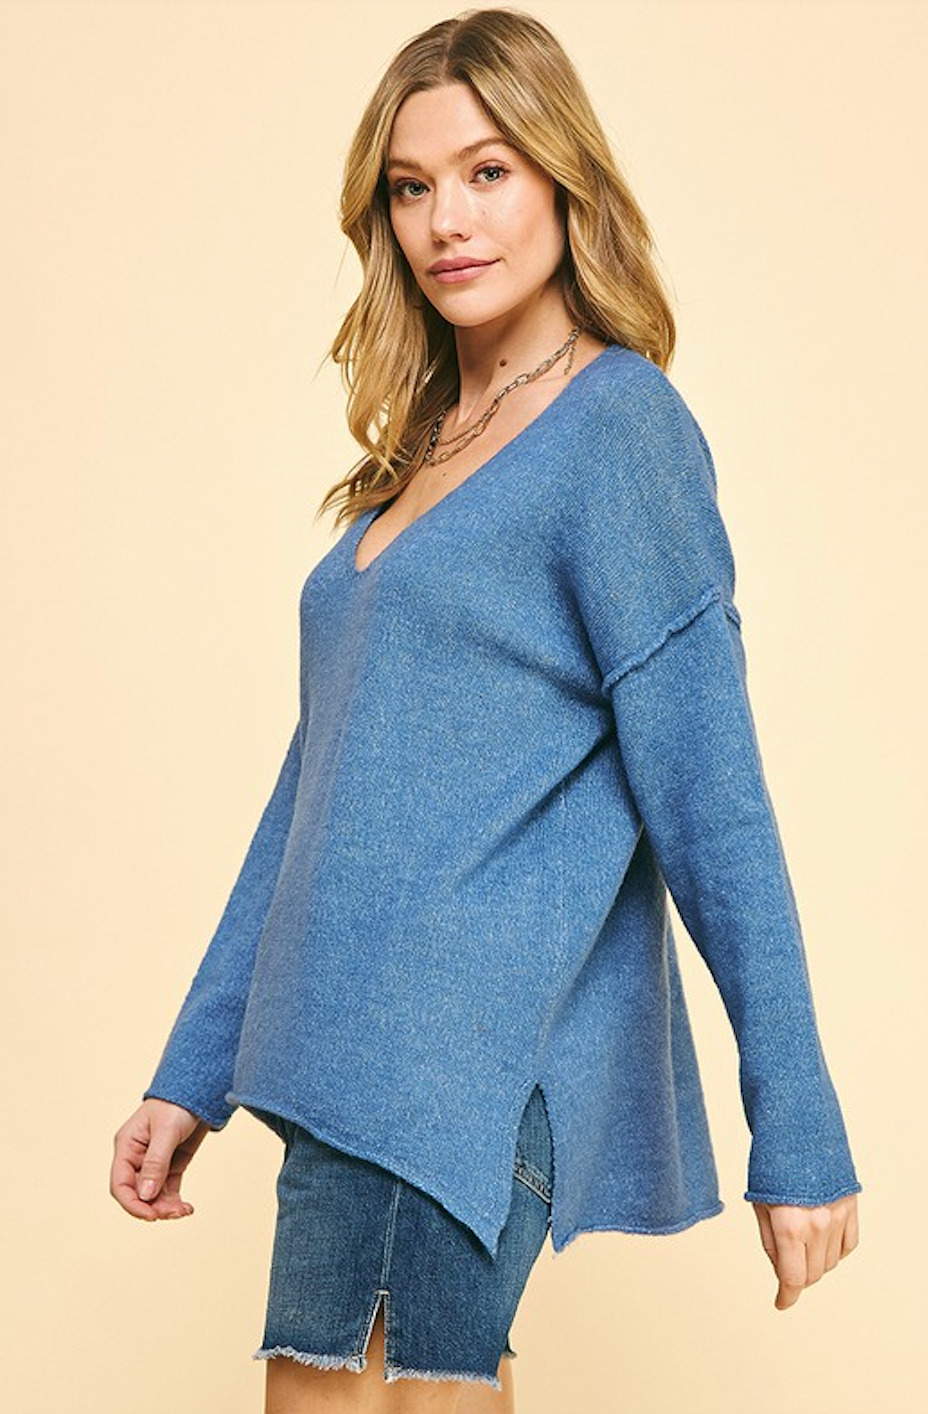 CLAIRE KNIT SWEATER IN DENIM BLUE